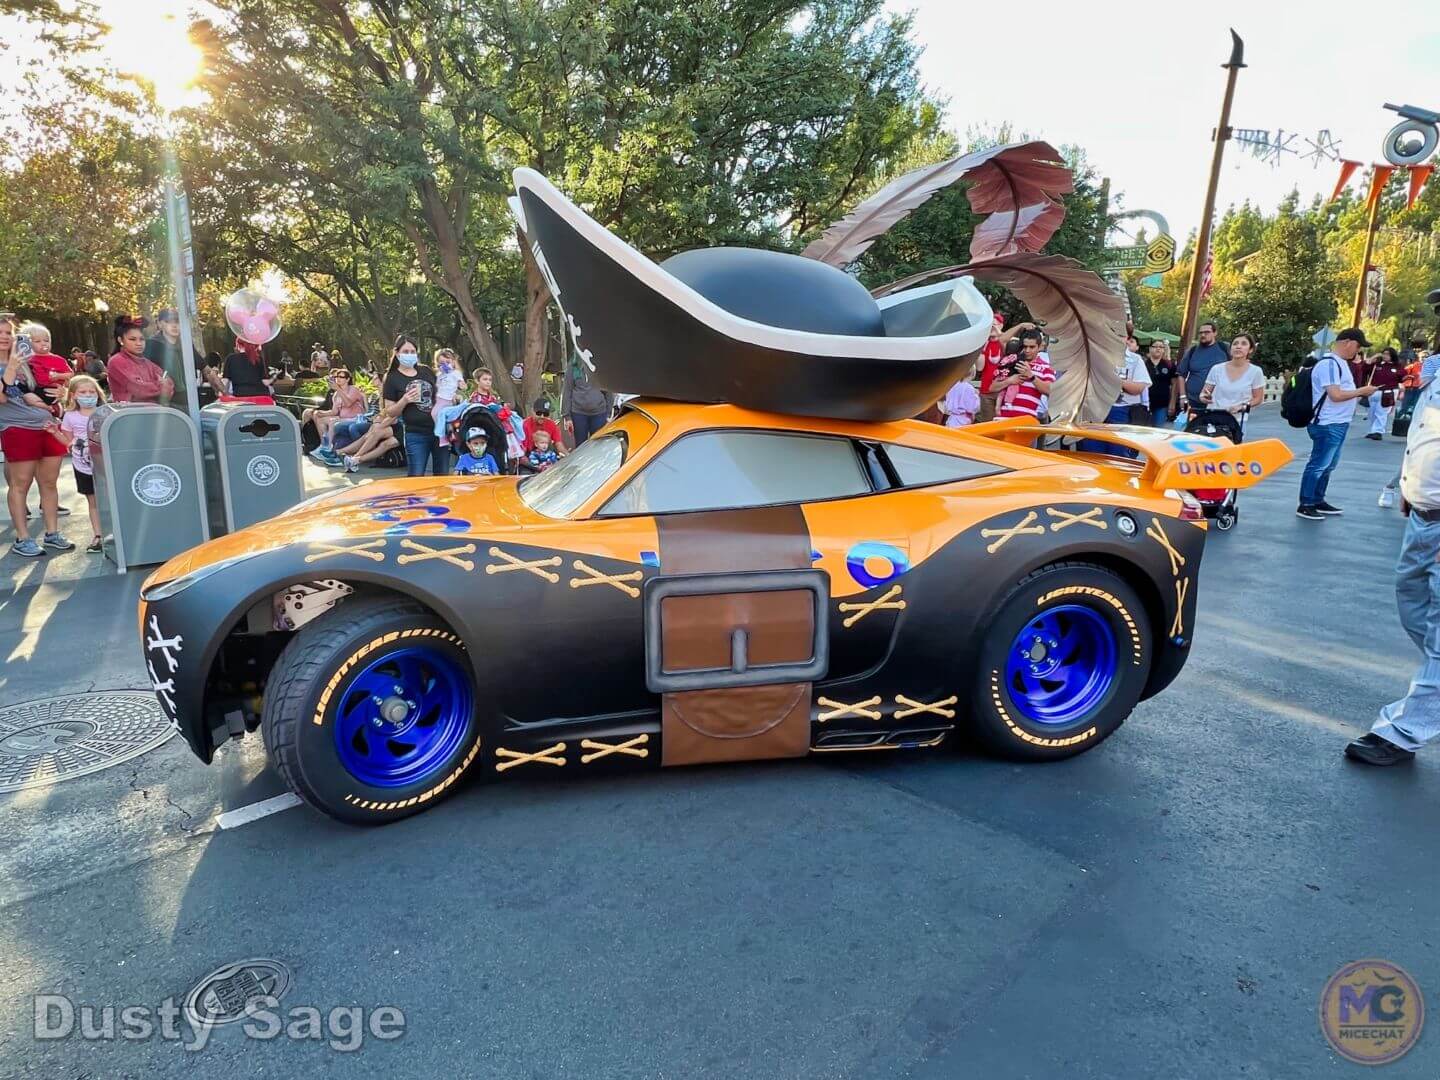 Spooky Details in Cars Land, Spooky Haul-O-Ween Details You May Have Missed in Cars Land